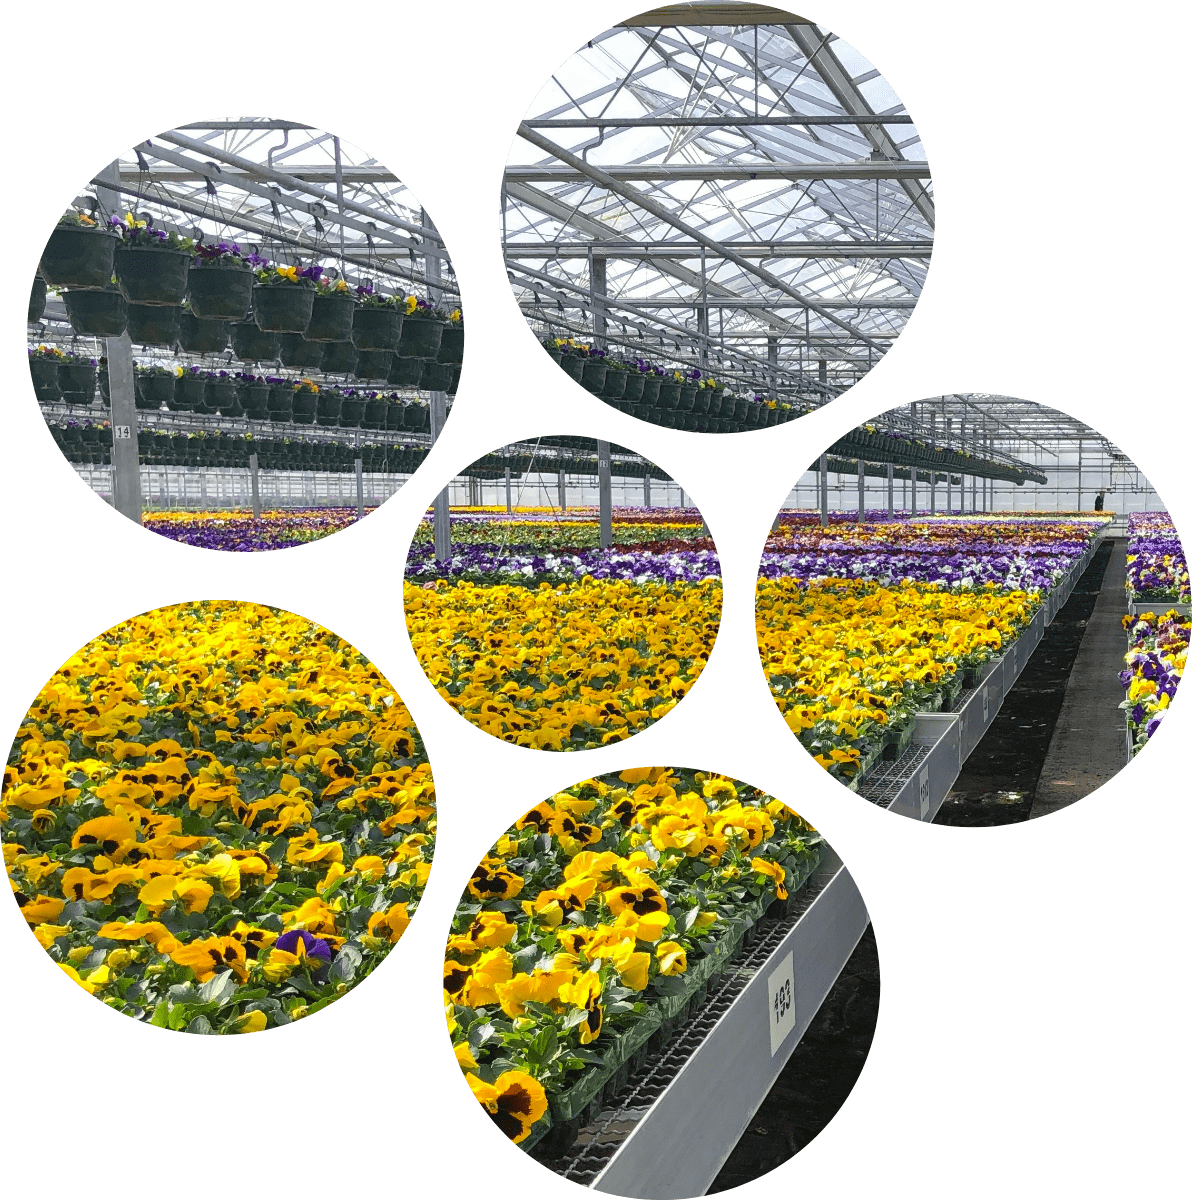 A view of the inside of Happy Plants greenhouse, showing rows of yellow and purple plants. The image is inside a flower shape